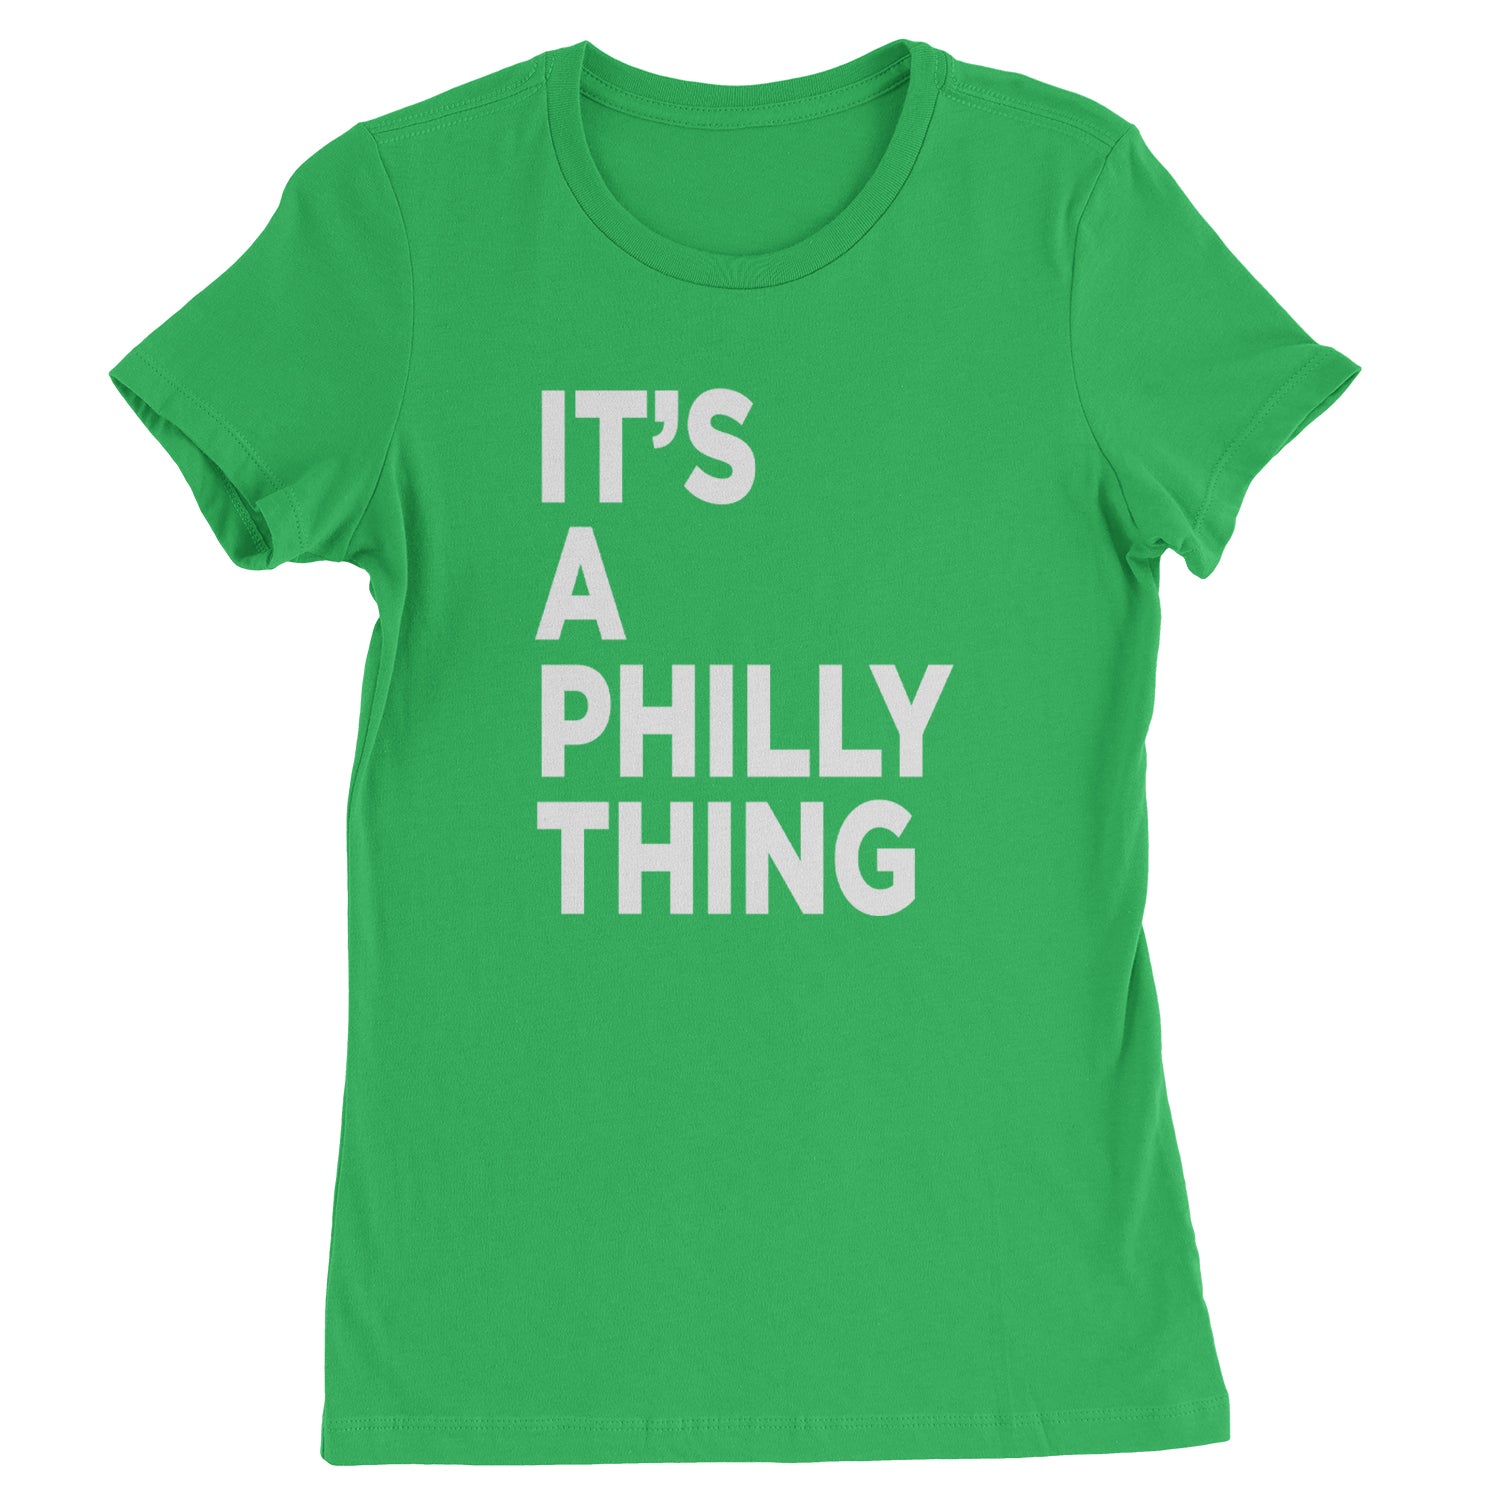 PHILLY It's A Philly Thing Womens T-shirt baseball, dilly, filly, football, jawn, morgan, Philadelphia, philli by Expression Tees